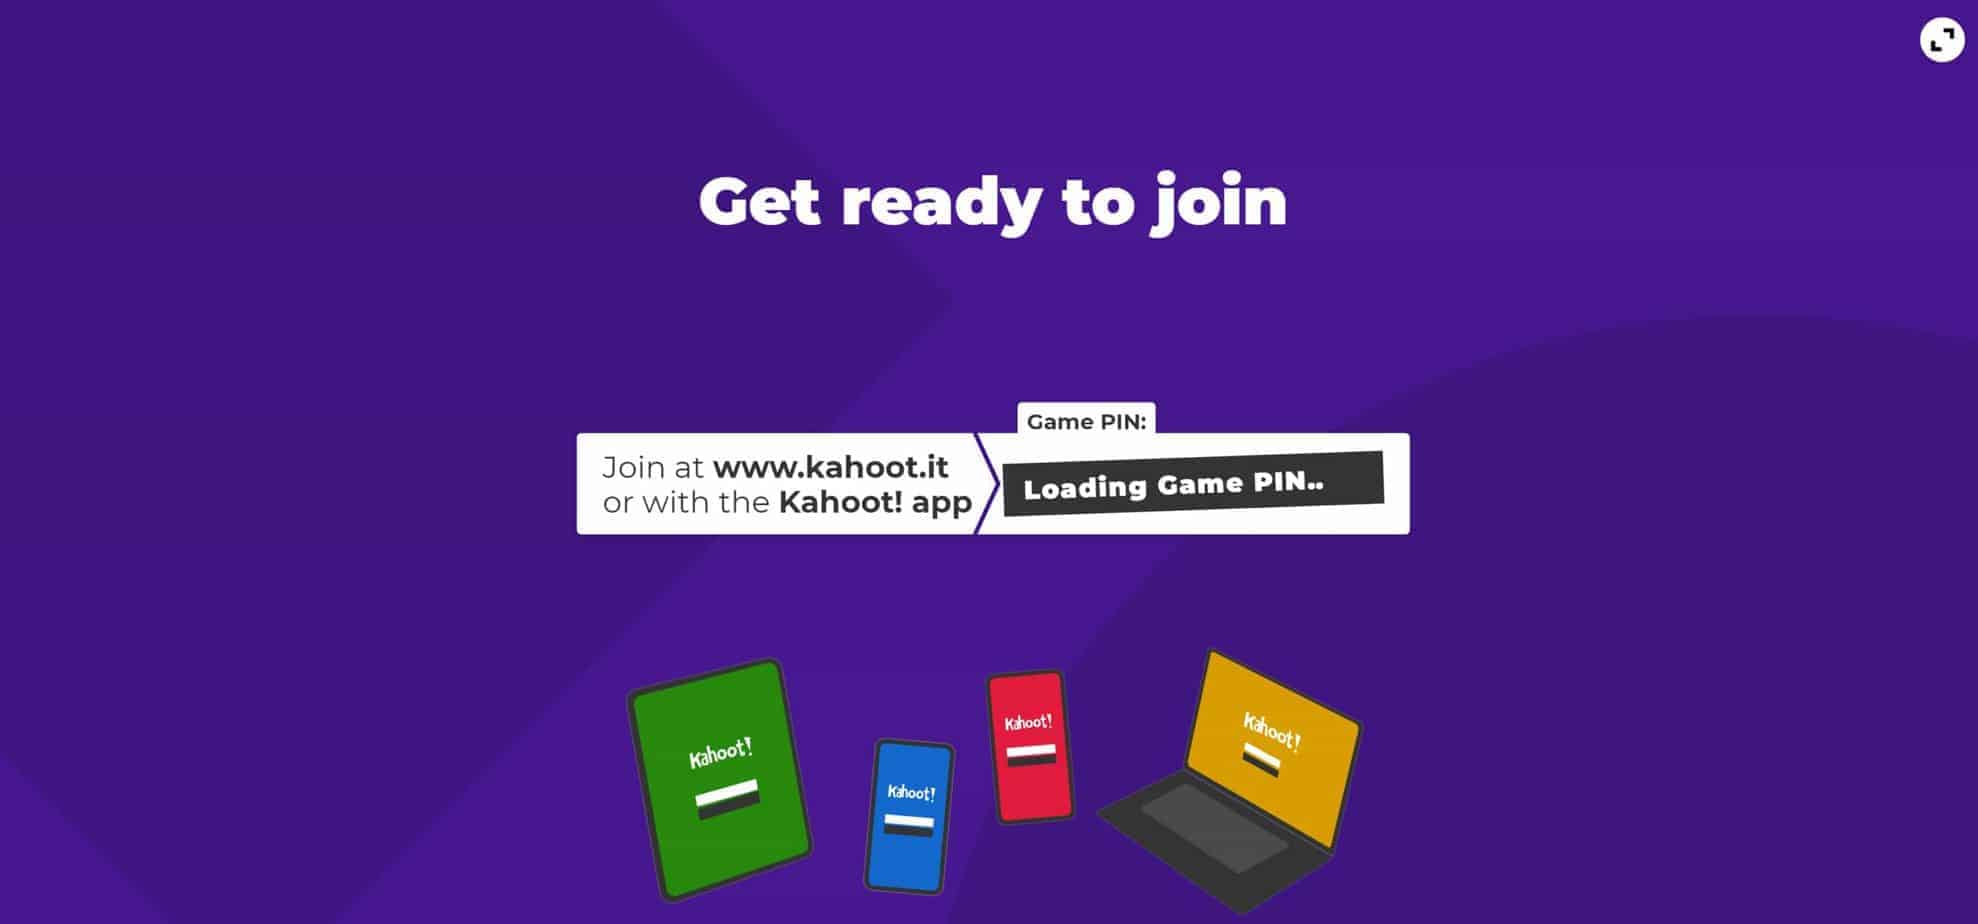 When Your Class Plays Kahoot Game - Make Fun with Kahoot